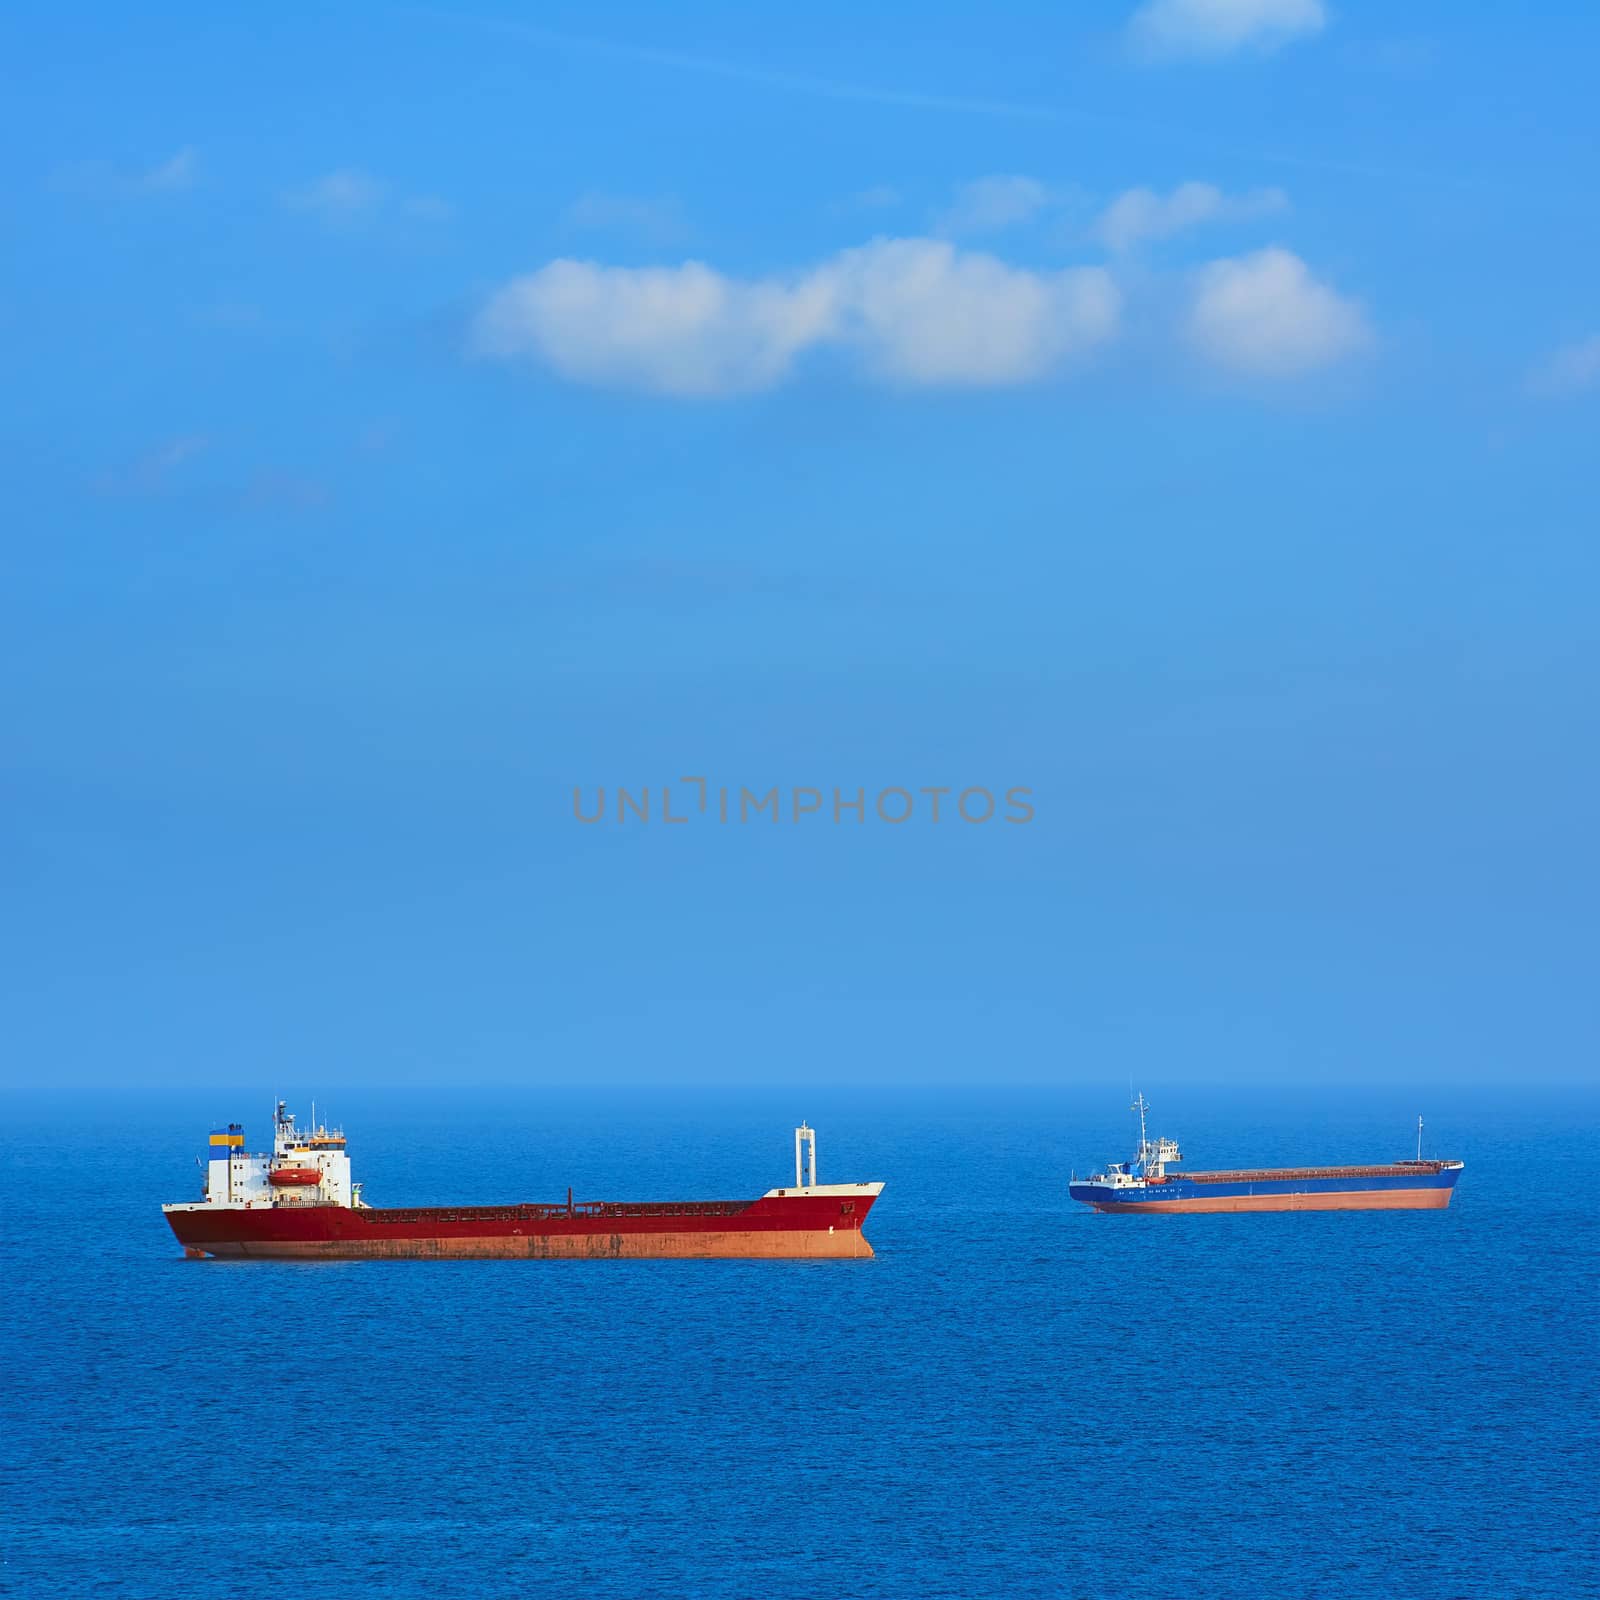 General Cargo Ships in the Black Sea